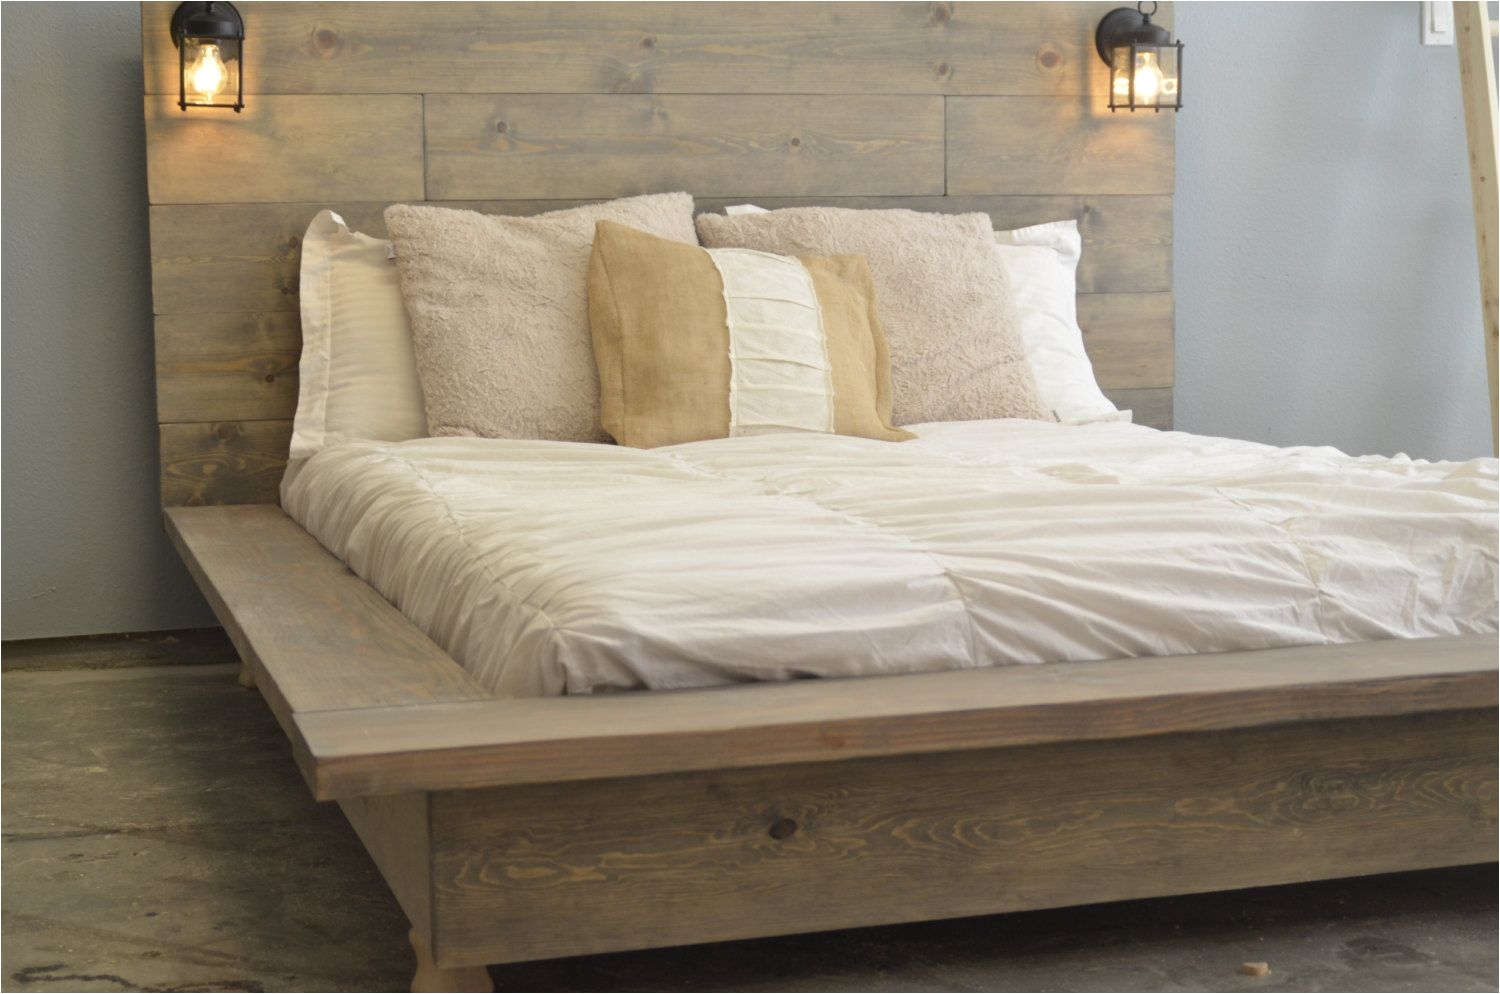 Bed Frames and Mattress On the Floor Floating Wood Platform Bed Frame with Lighted Headboard Quilmes